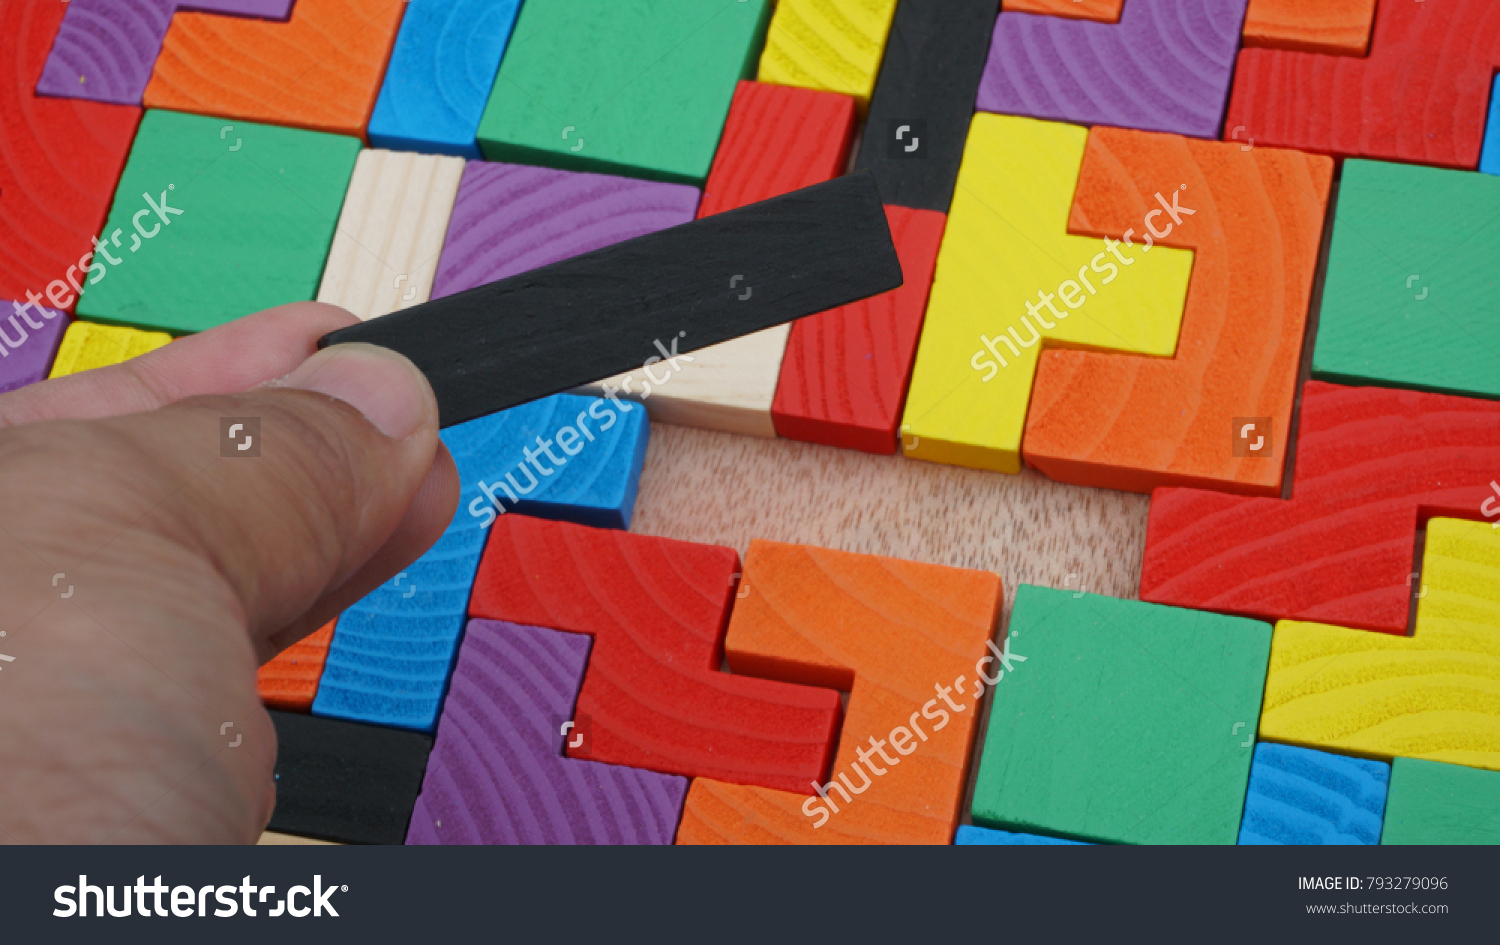 Selective focus of multicolored wooden jigsaw bricks relating to problem solving at early stage of education #793279096